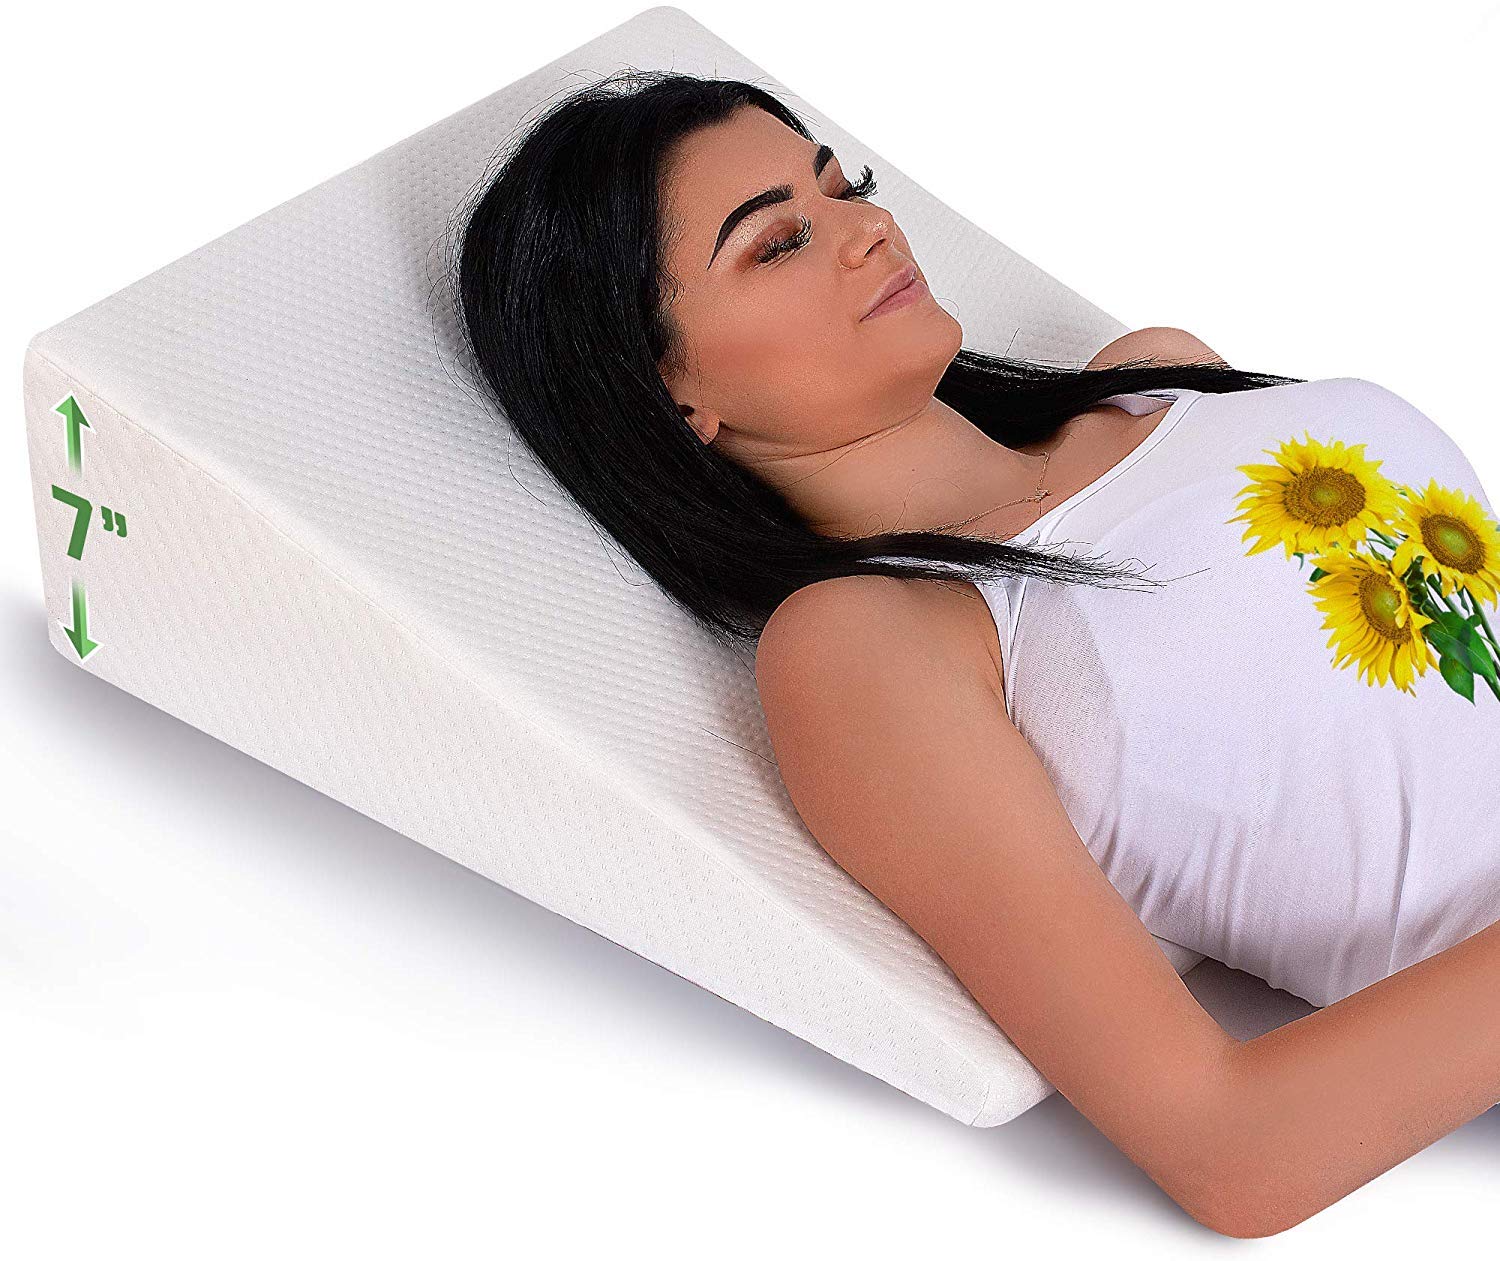 Bed Wedge Pillow with Memory Foam Top - Reduce Neck and Back Pain, Snoring, Acid Reflux and Respiratory Problems - Ideal for Sleeping, Reading, Rest or Elevation - Breathable and Washable Cover - 12in  - Like New